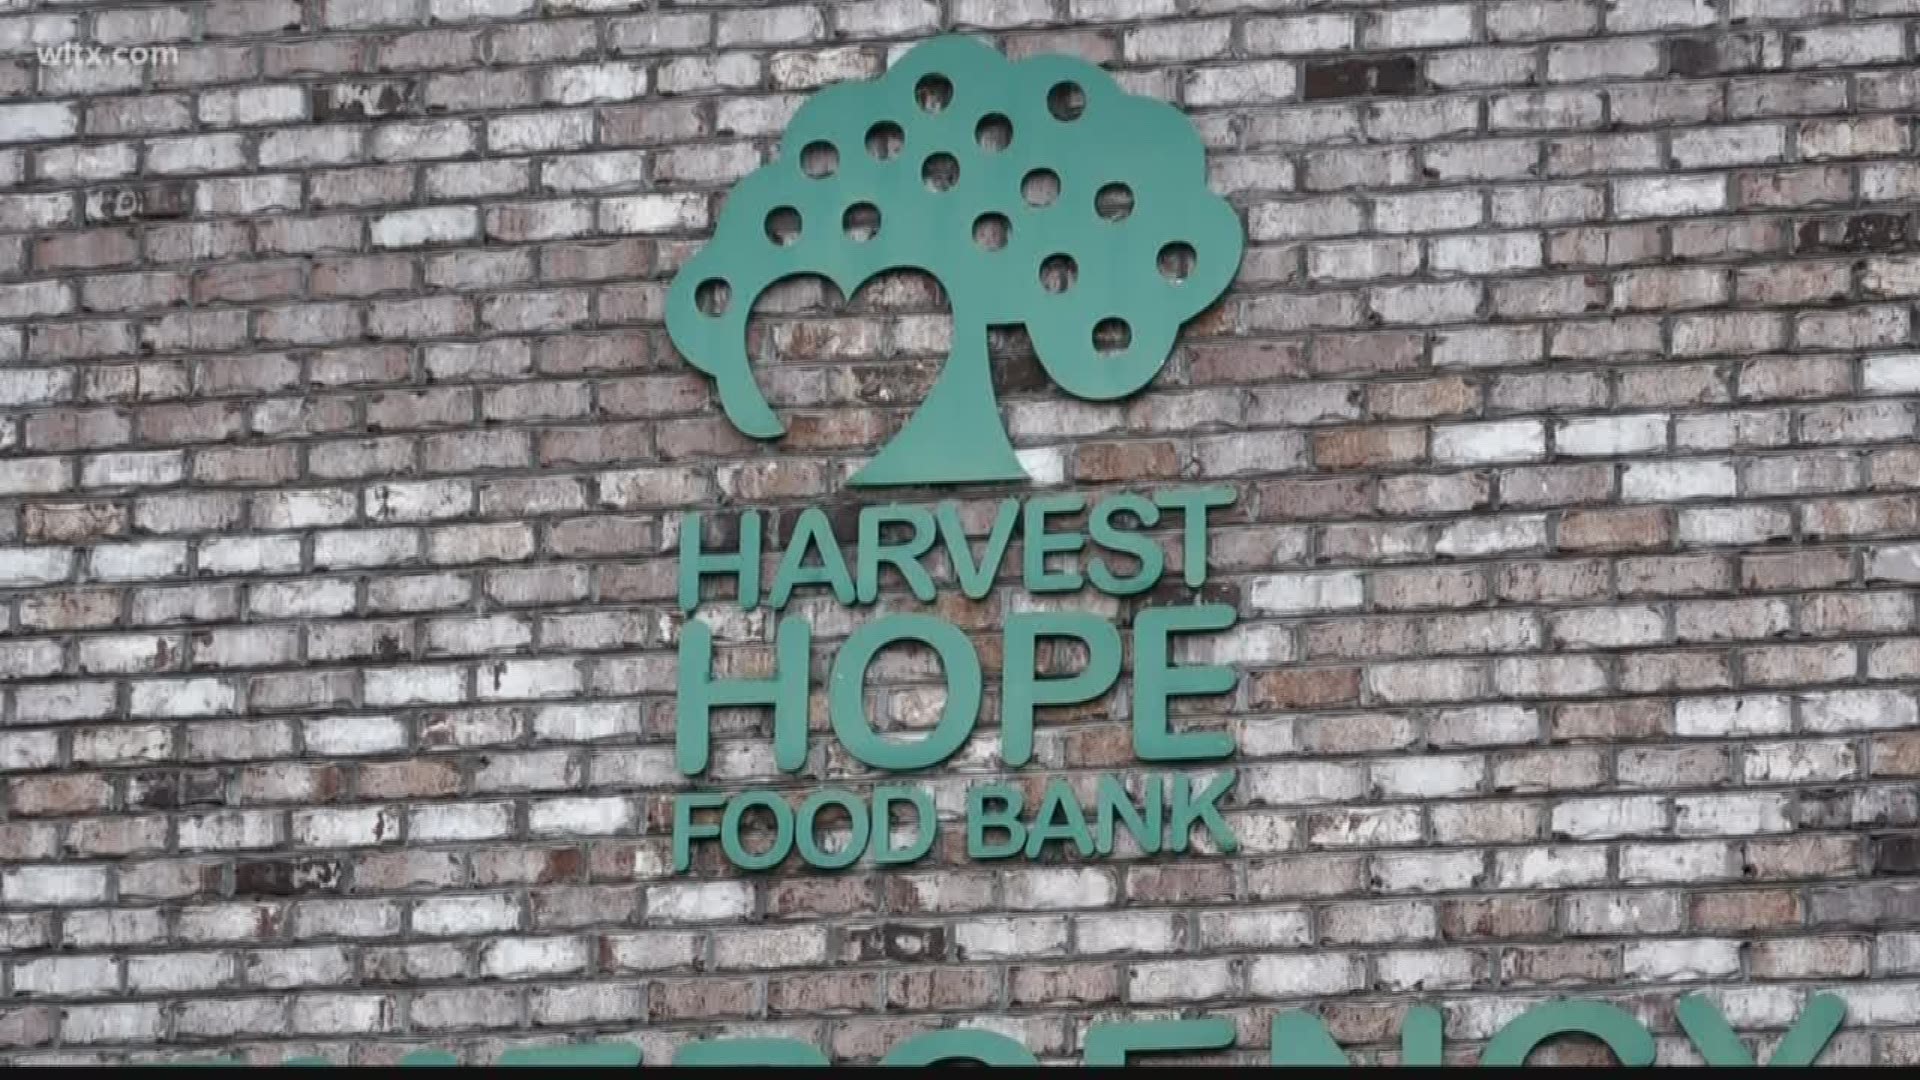 The Harvest Hope Food Bank announced that they'll be closing their doors at their Cayce location.